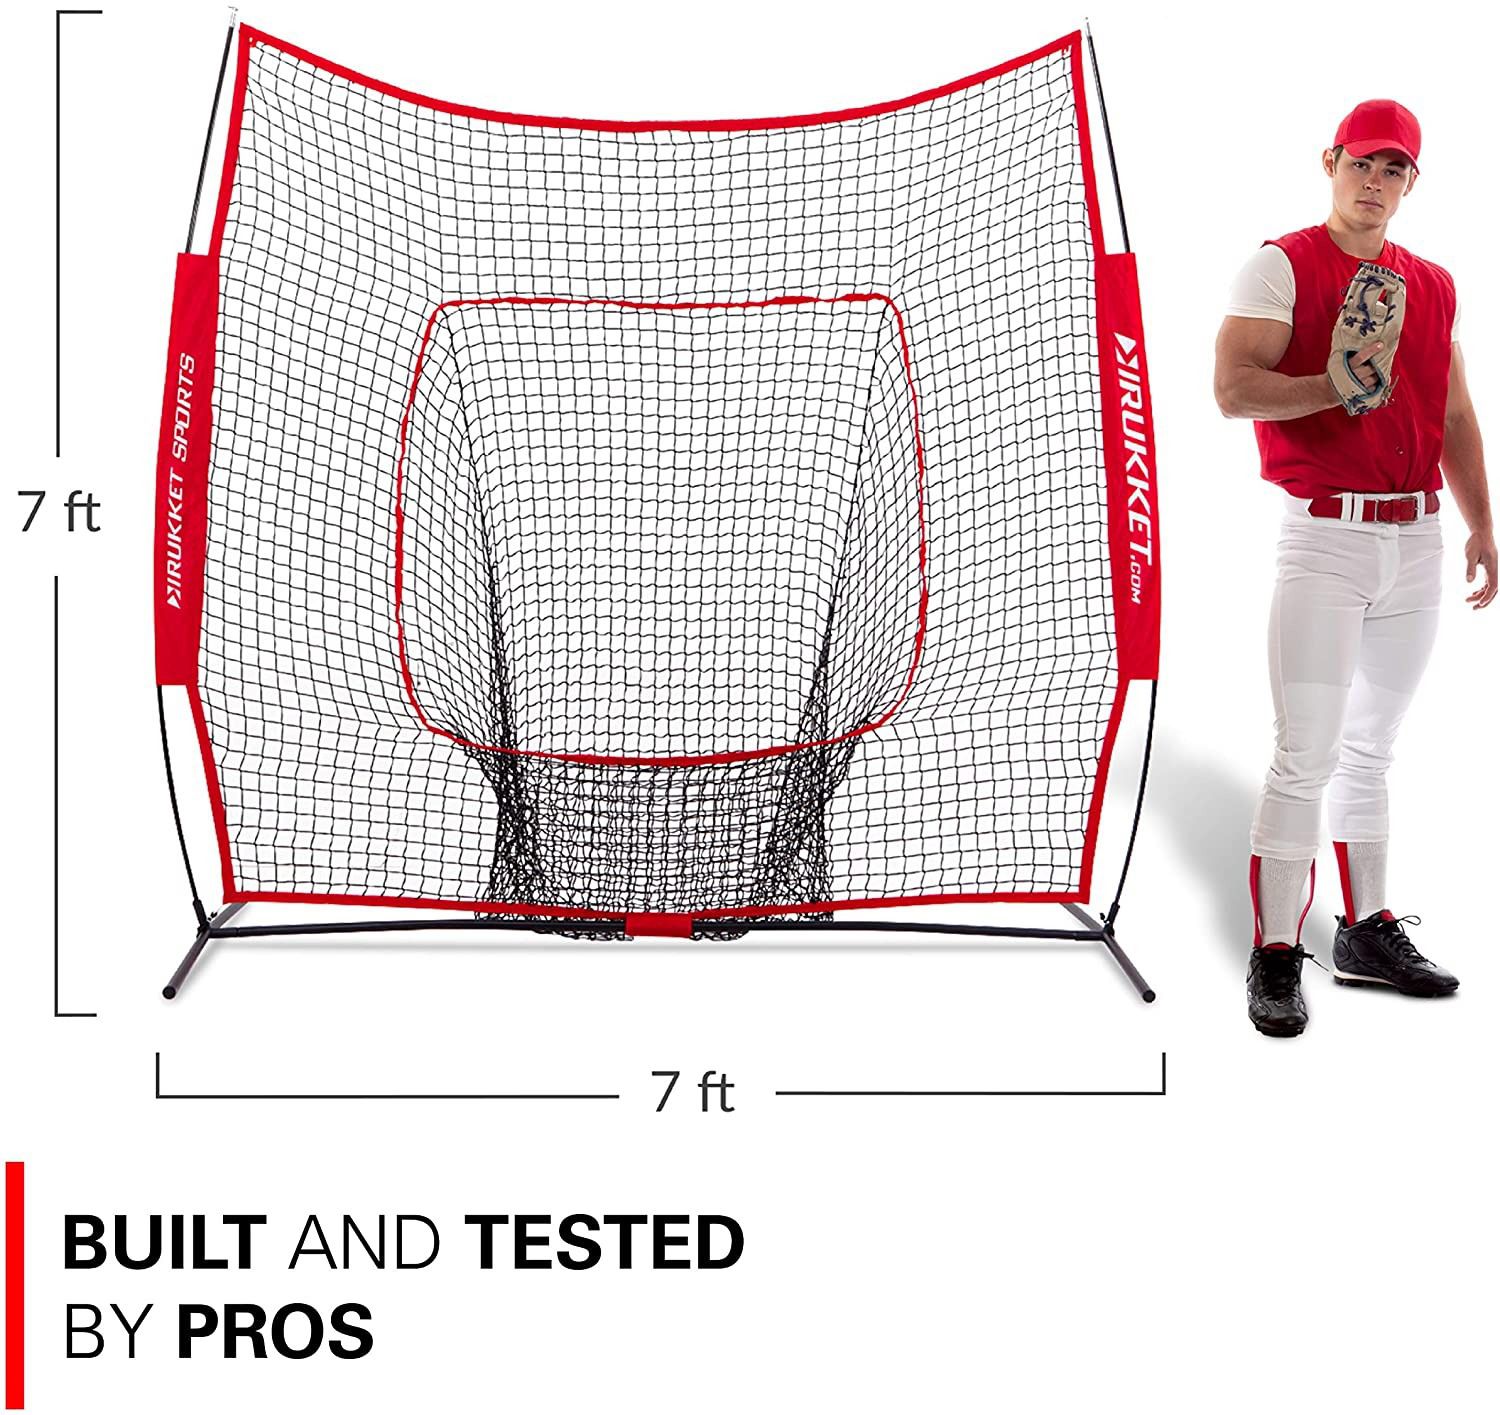 Rukket 7x7 Baseball & Softball Net, Practice Hitting, Pitching, Batting and Catching, Backstop Screen Equipment Training Aids, Includes Carry Bag (7x7